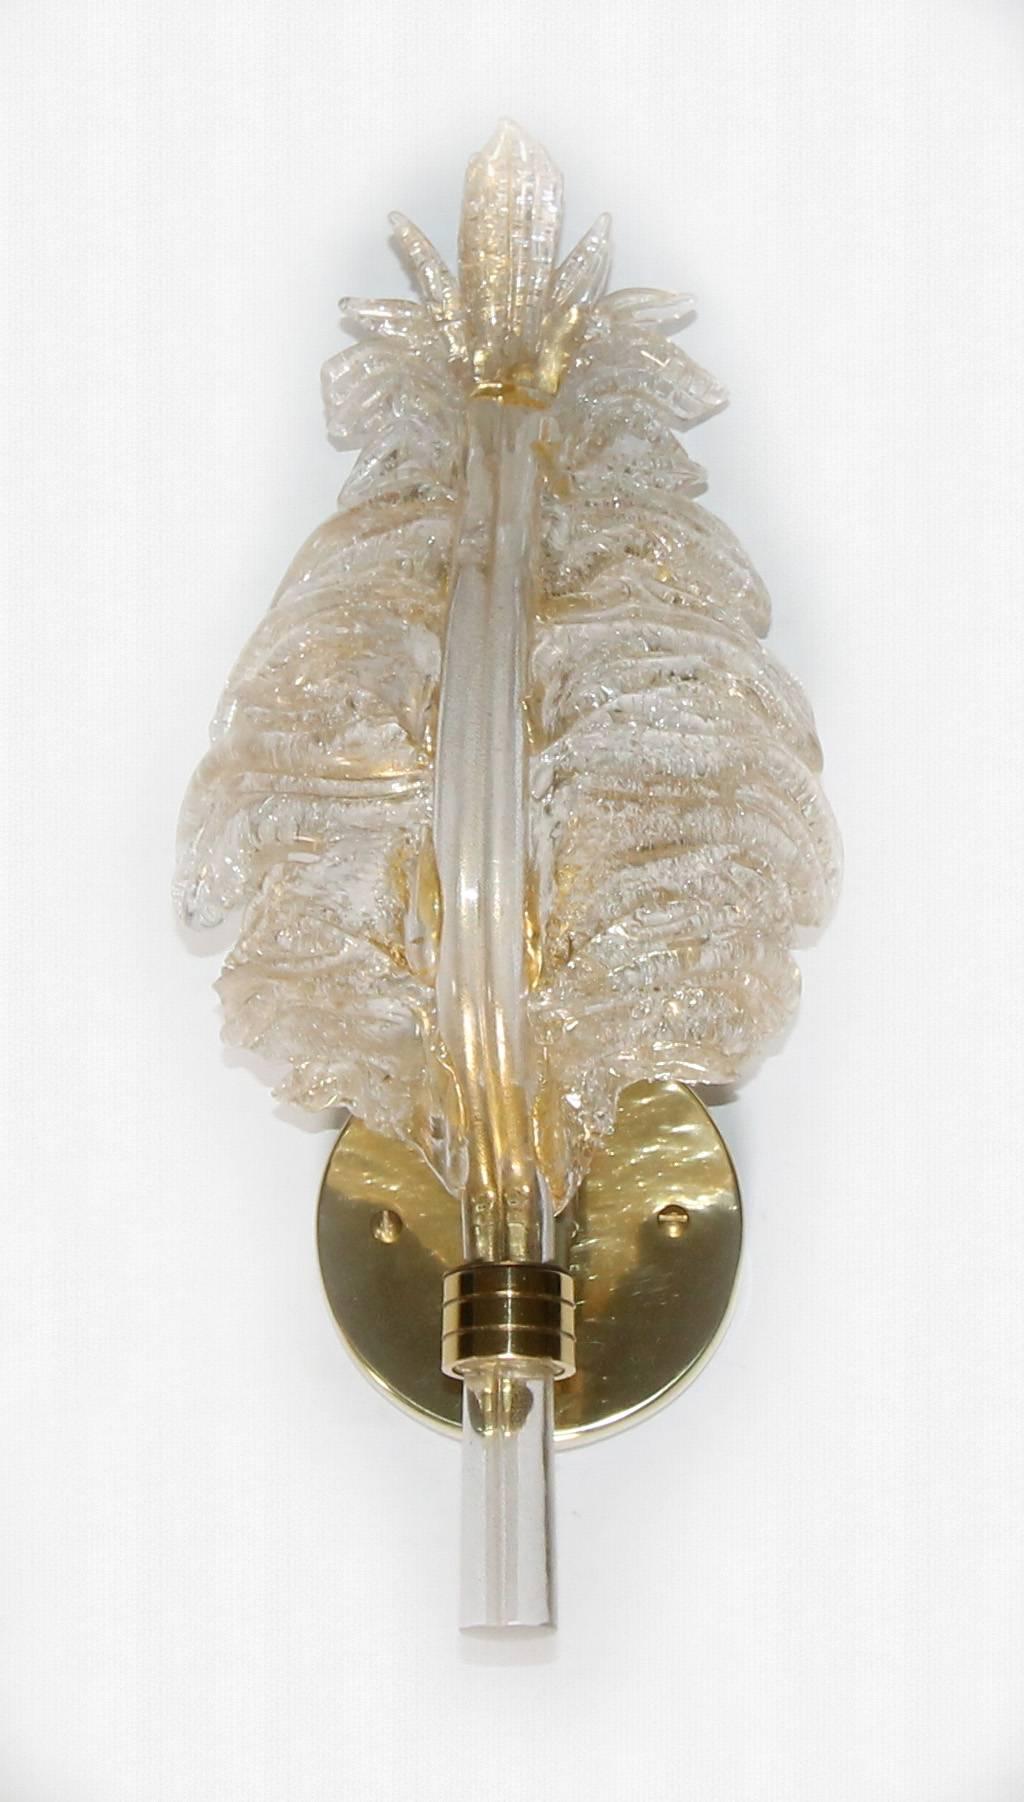 One slender handblown Barovier & Toso glass leaf wall sconce in in clear with heavy gold inclusions. Rugiodoso technique to back of leaf with scattered particles of glass to help diffuse light. Supported on brass backplate, fixture uses one